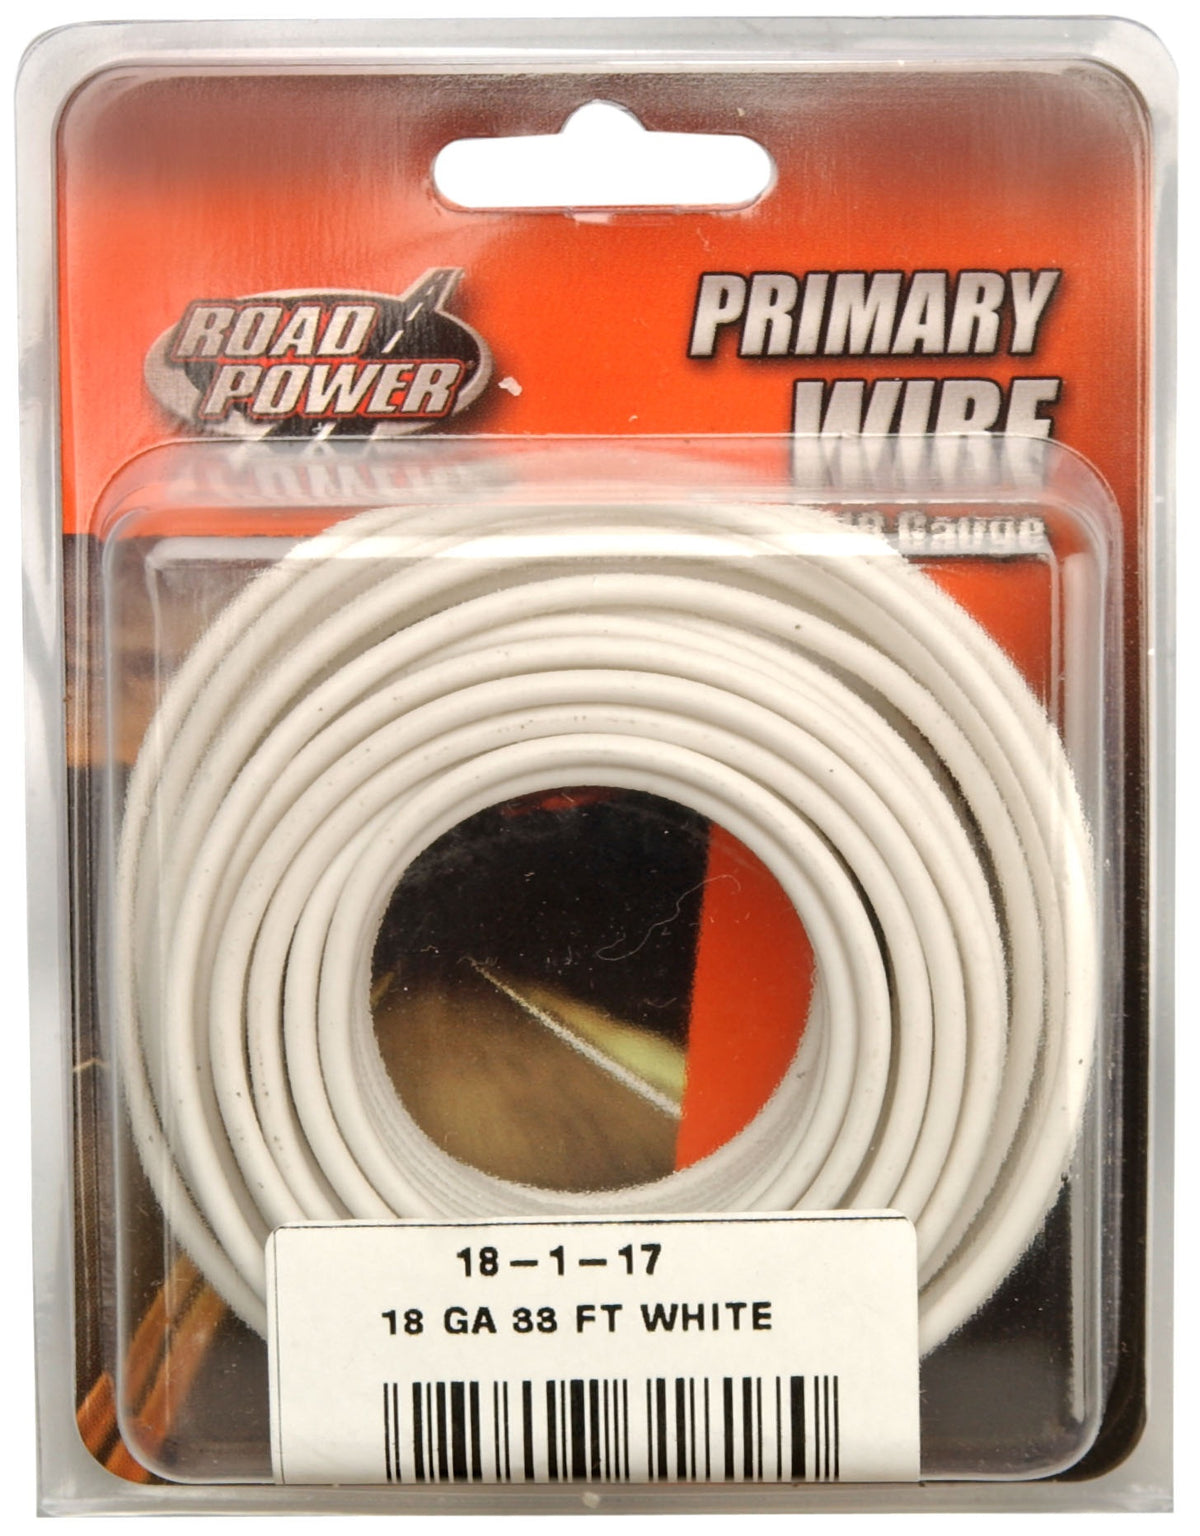 Road Power 55667233 Primary Electrical Wire, 18 Guage, 33', White